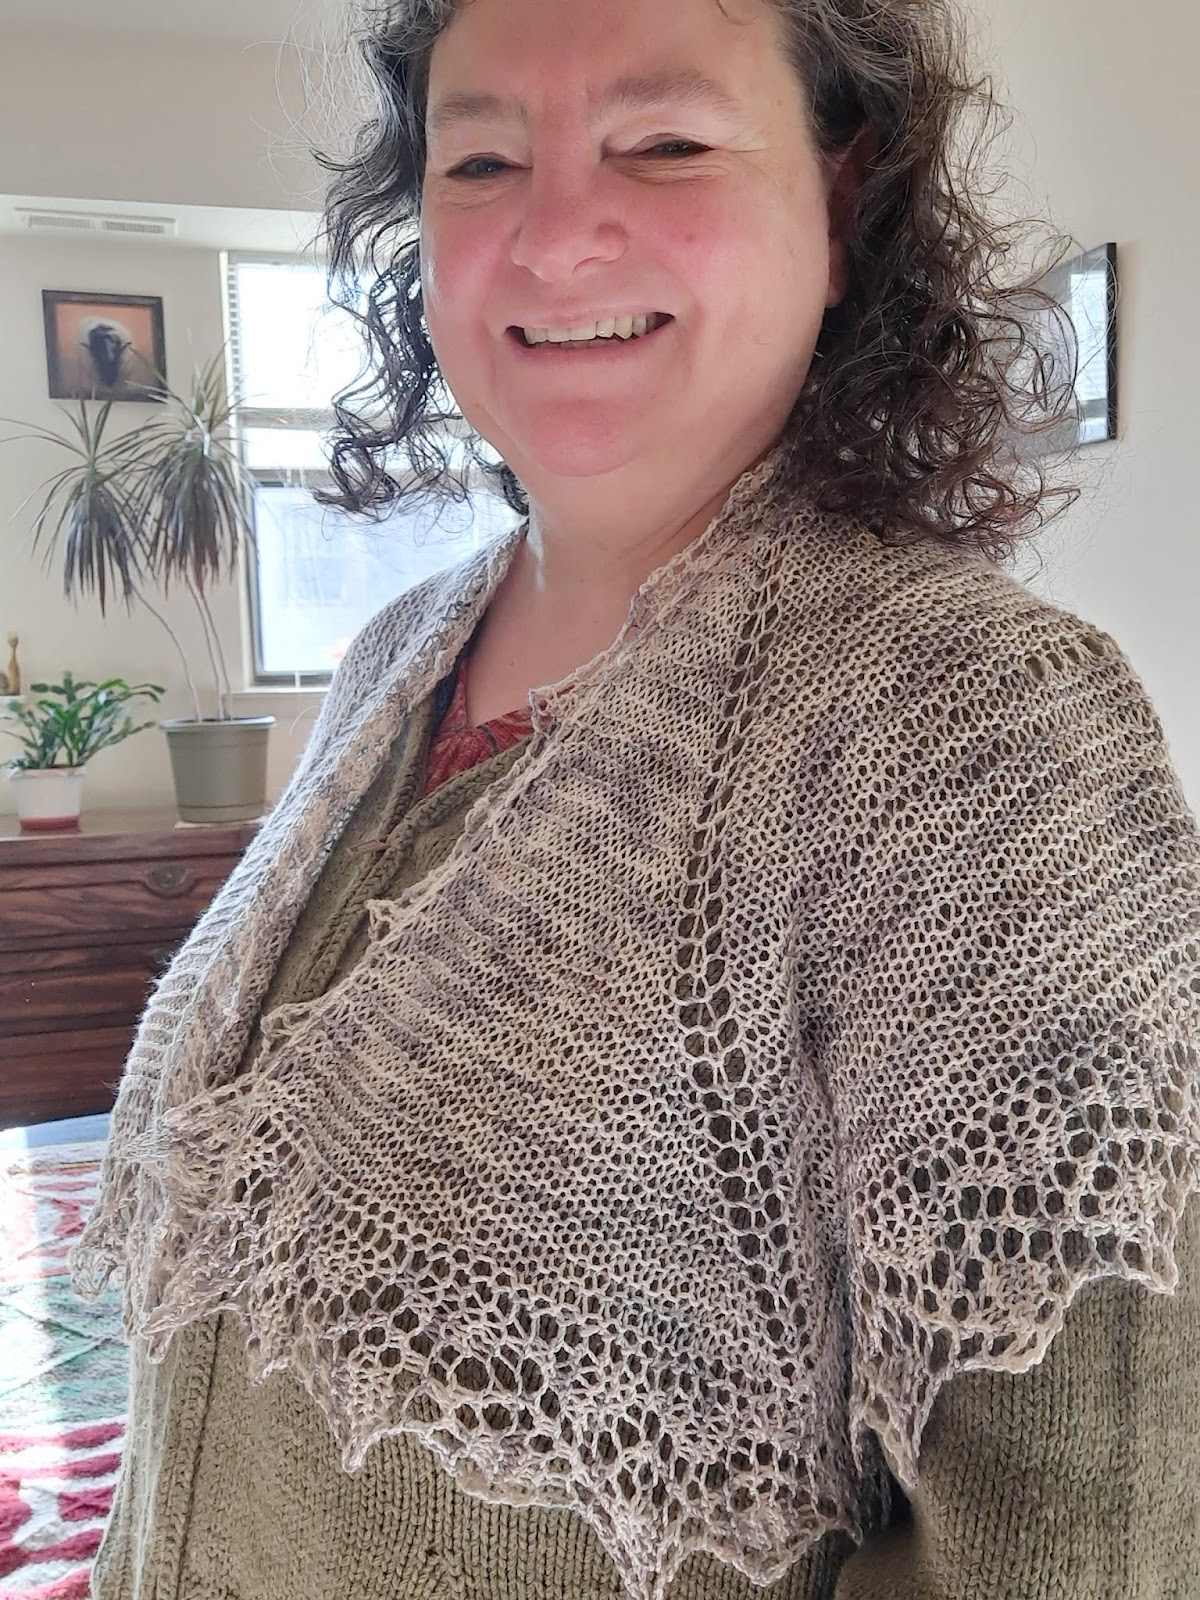 White woman with brown curly hair smiling wearing a white-grey shawl over her shoulders. There are plants and pictures in the background. 